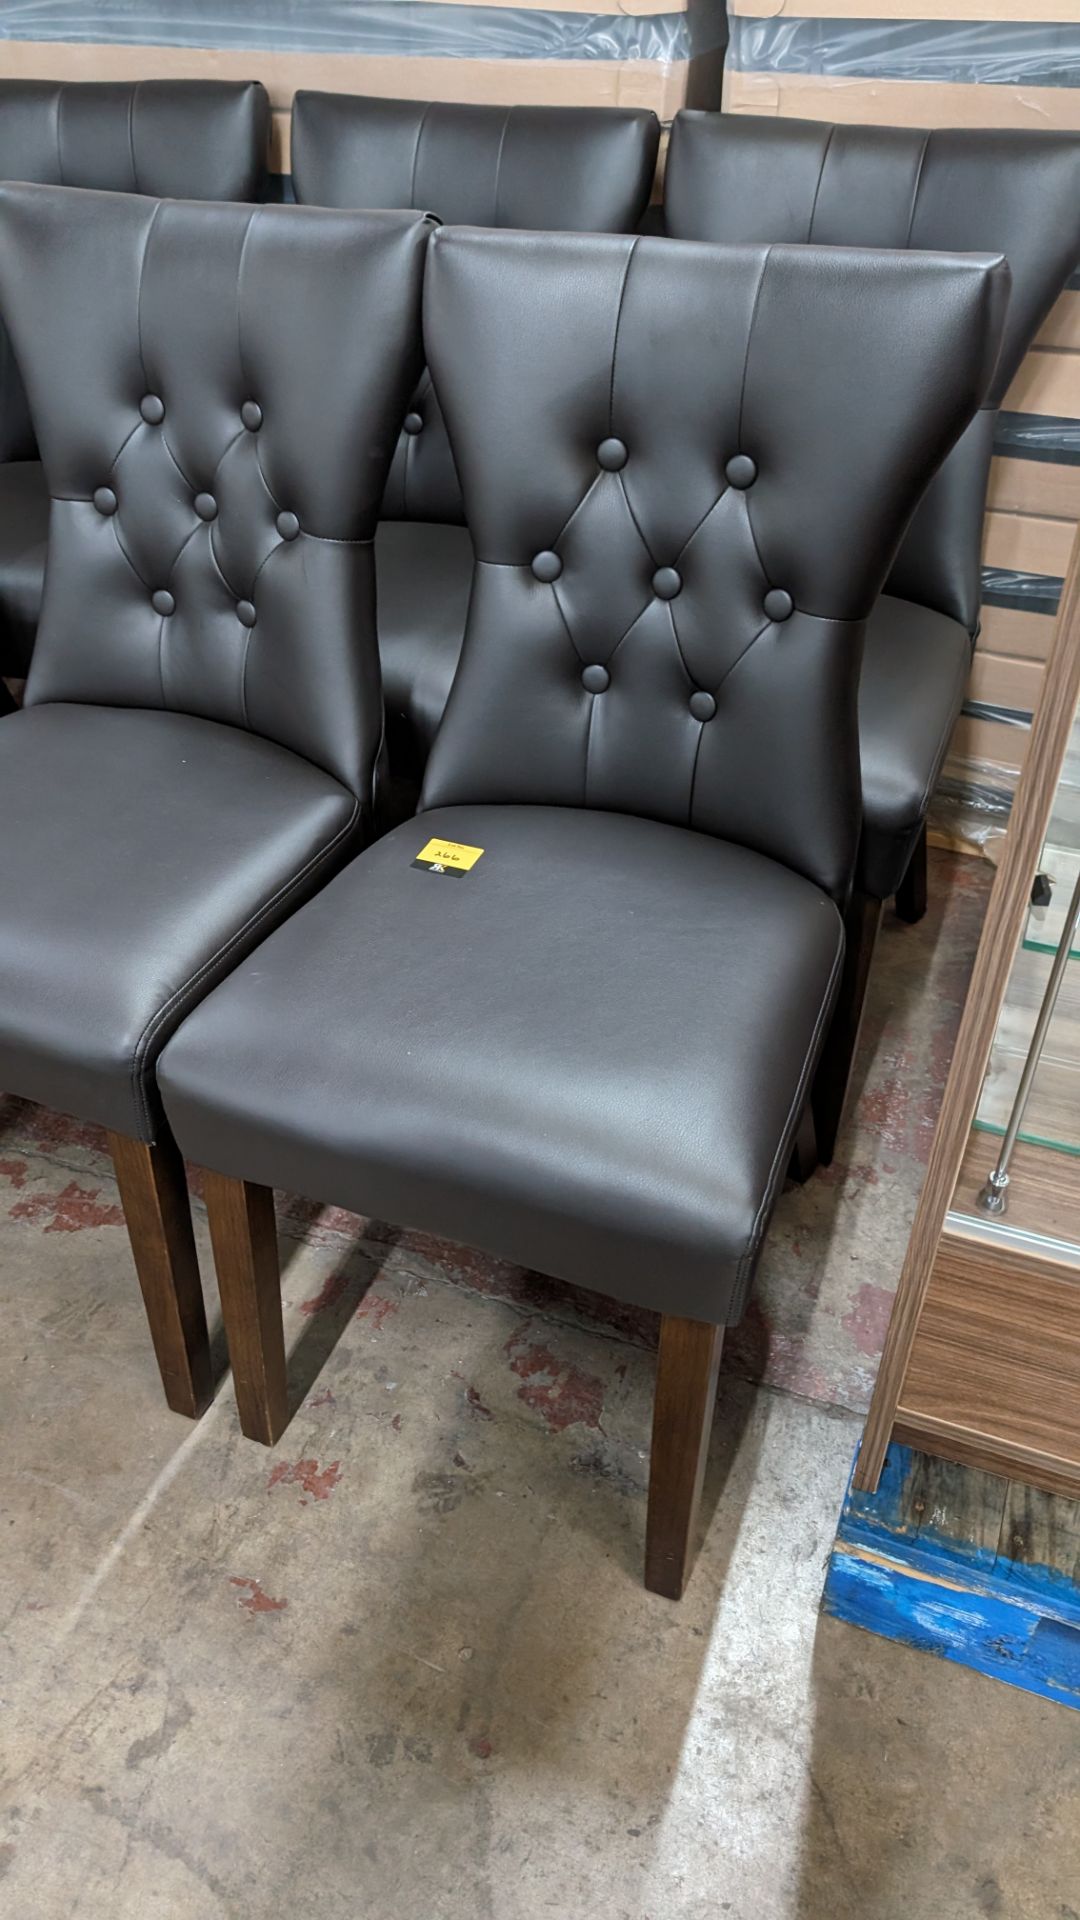 8 off matching pleather dark brown dining chairs - Image 3 of 7